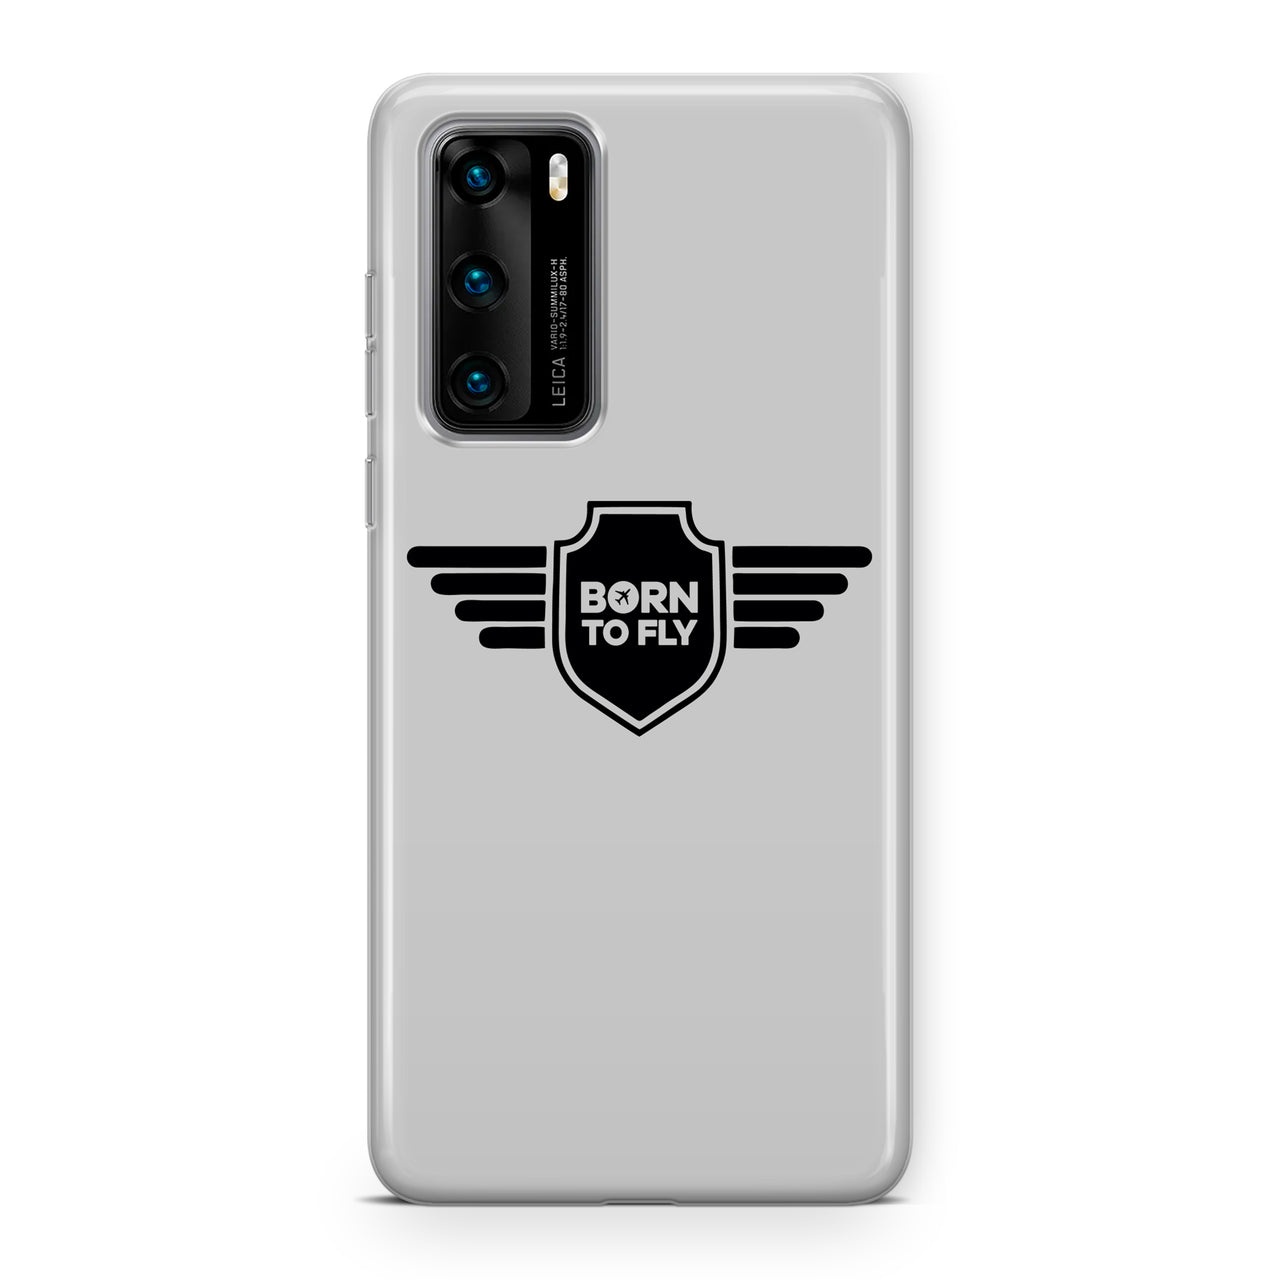 Born To Fly & Badge Designed Huawei Cases